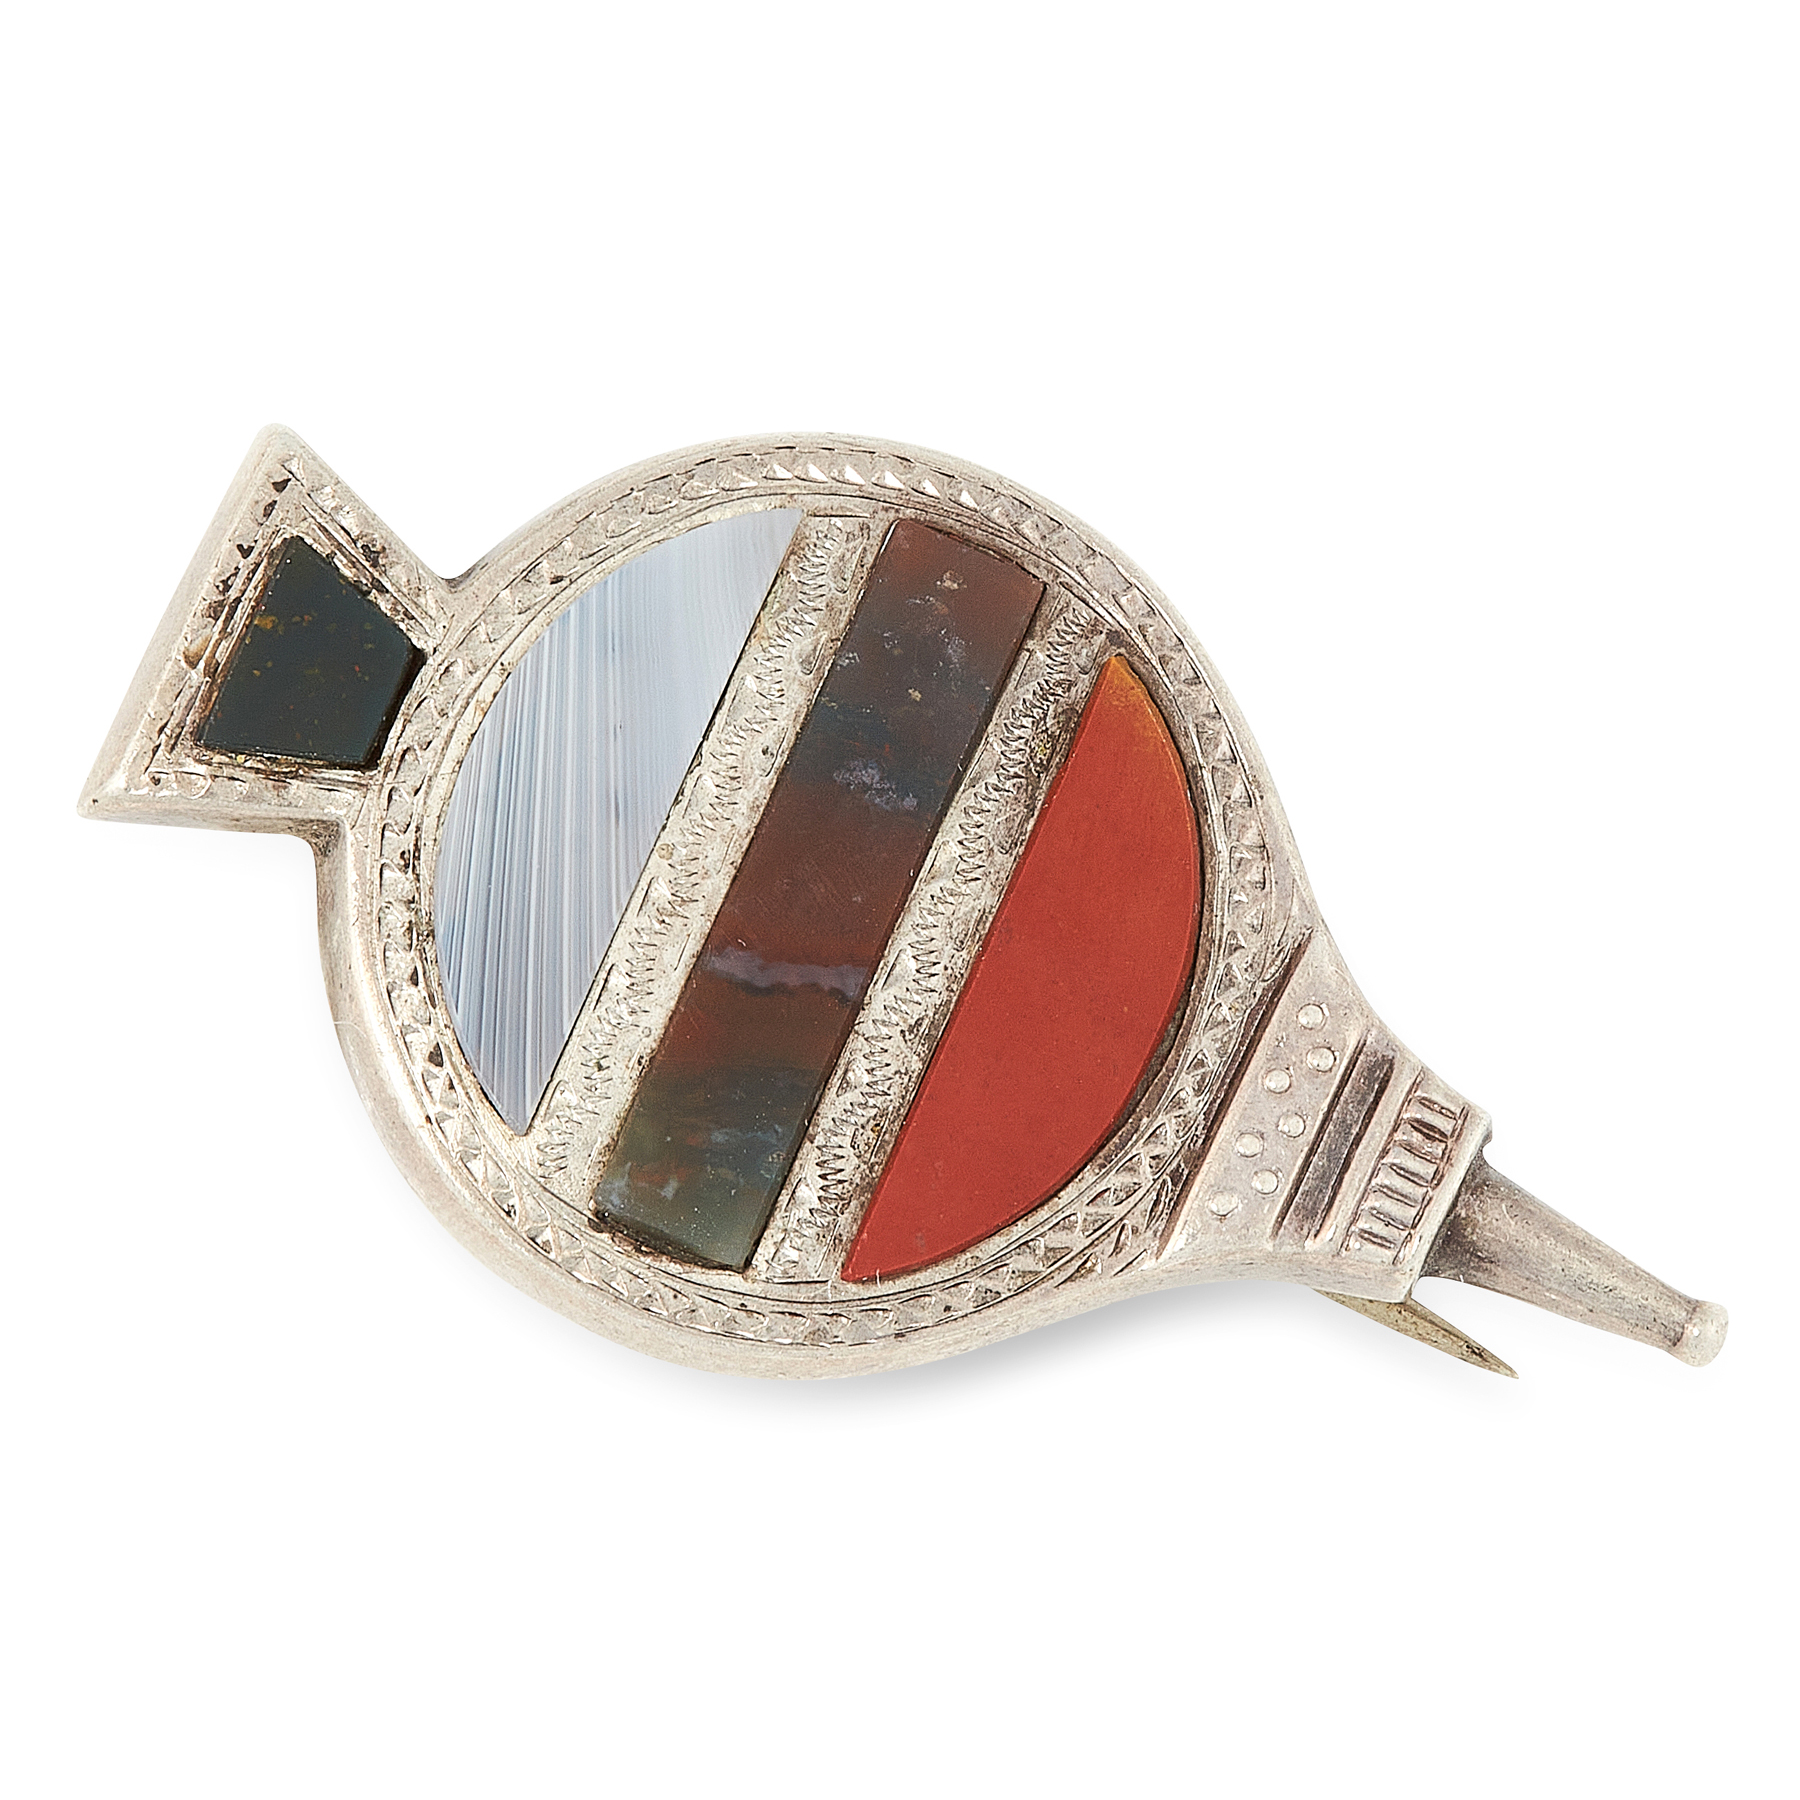 AN ANTIQUE SCOTTISH HARDSTONE BROOCH in silver, designed as a bellows, the body and handle inset